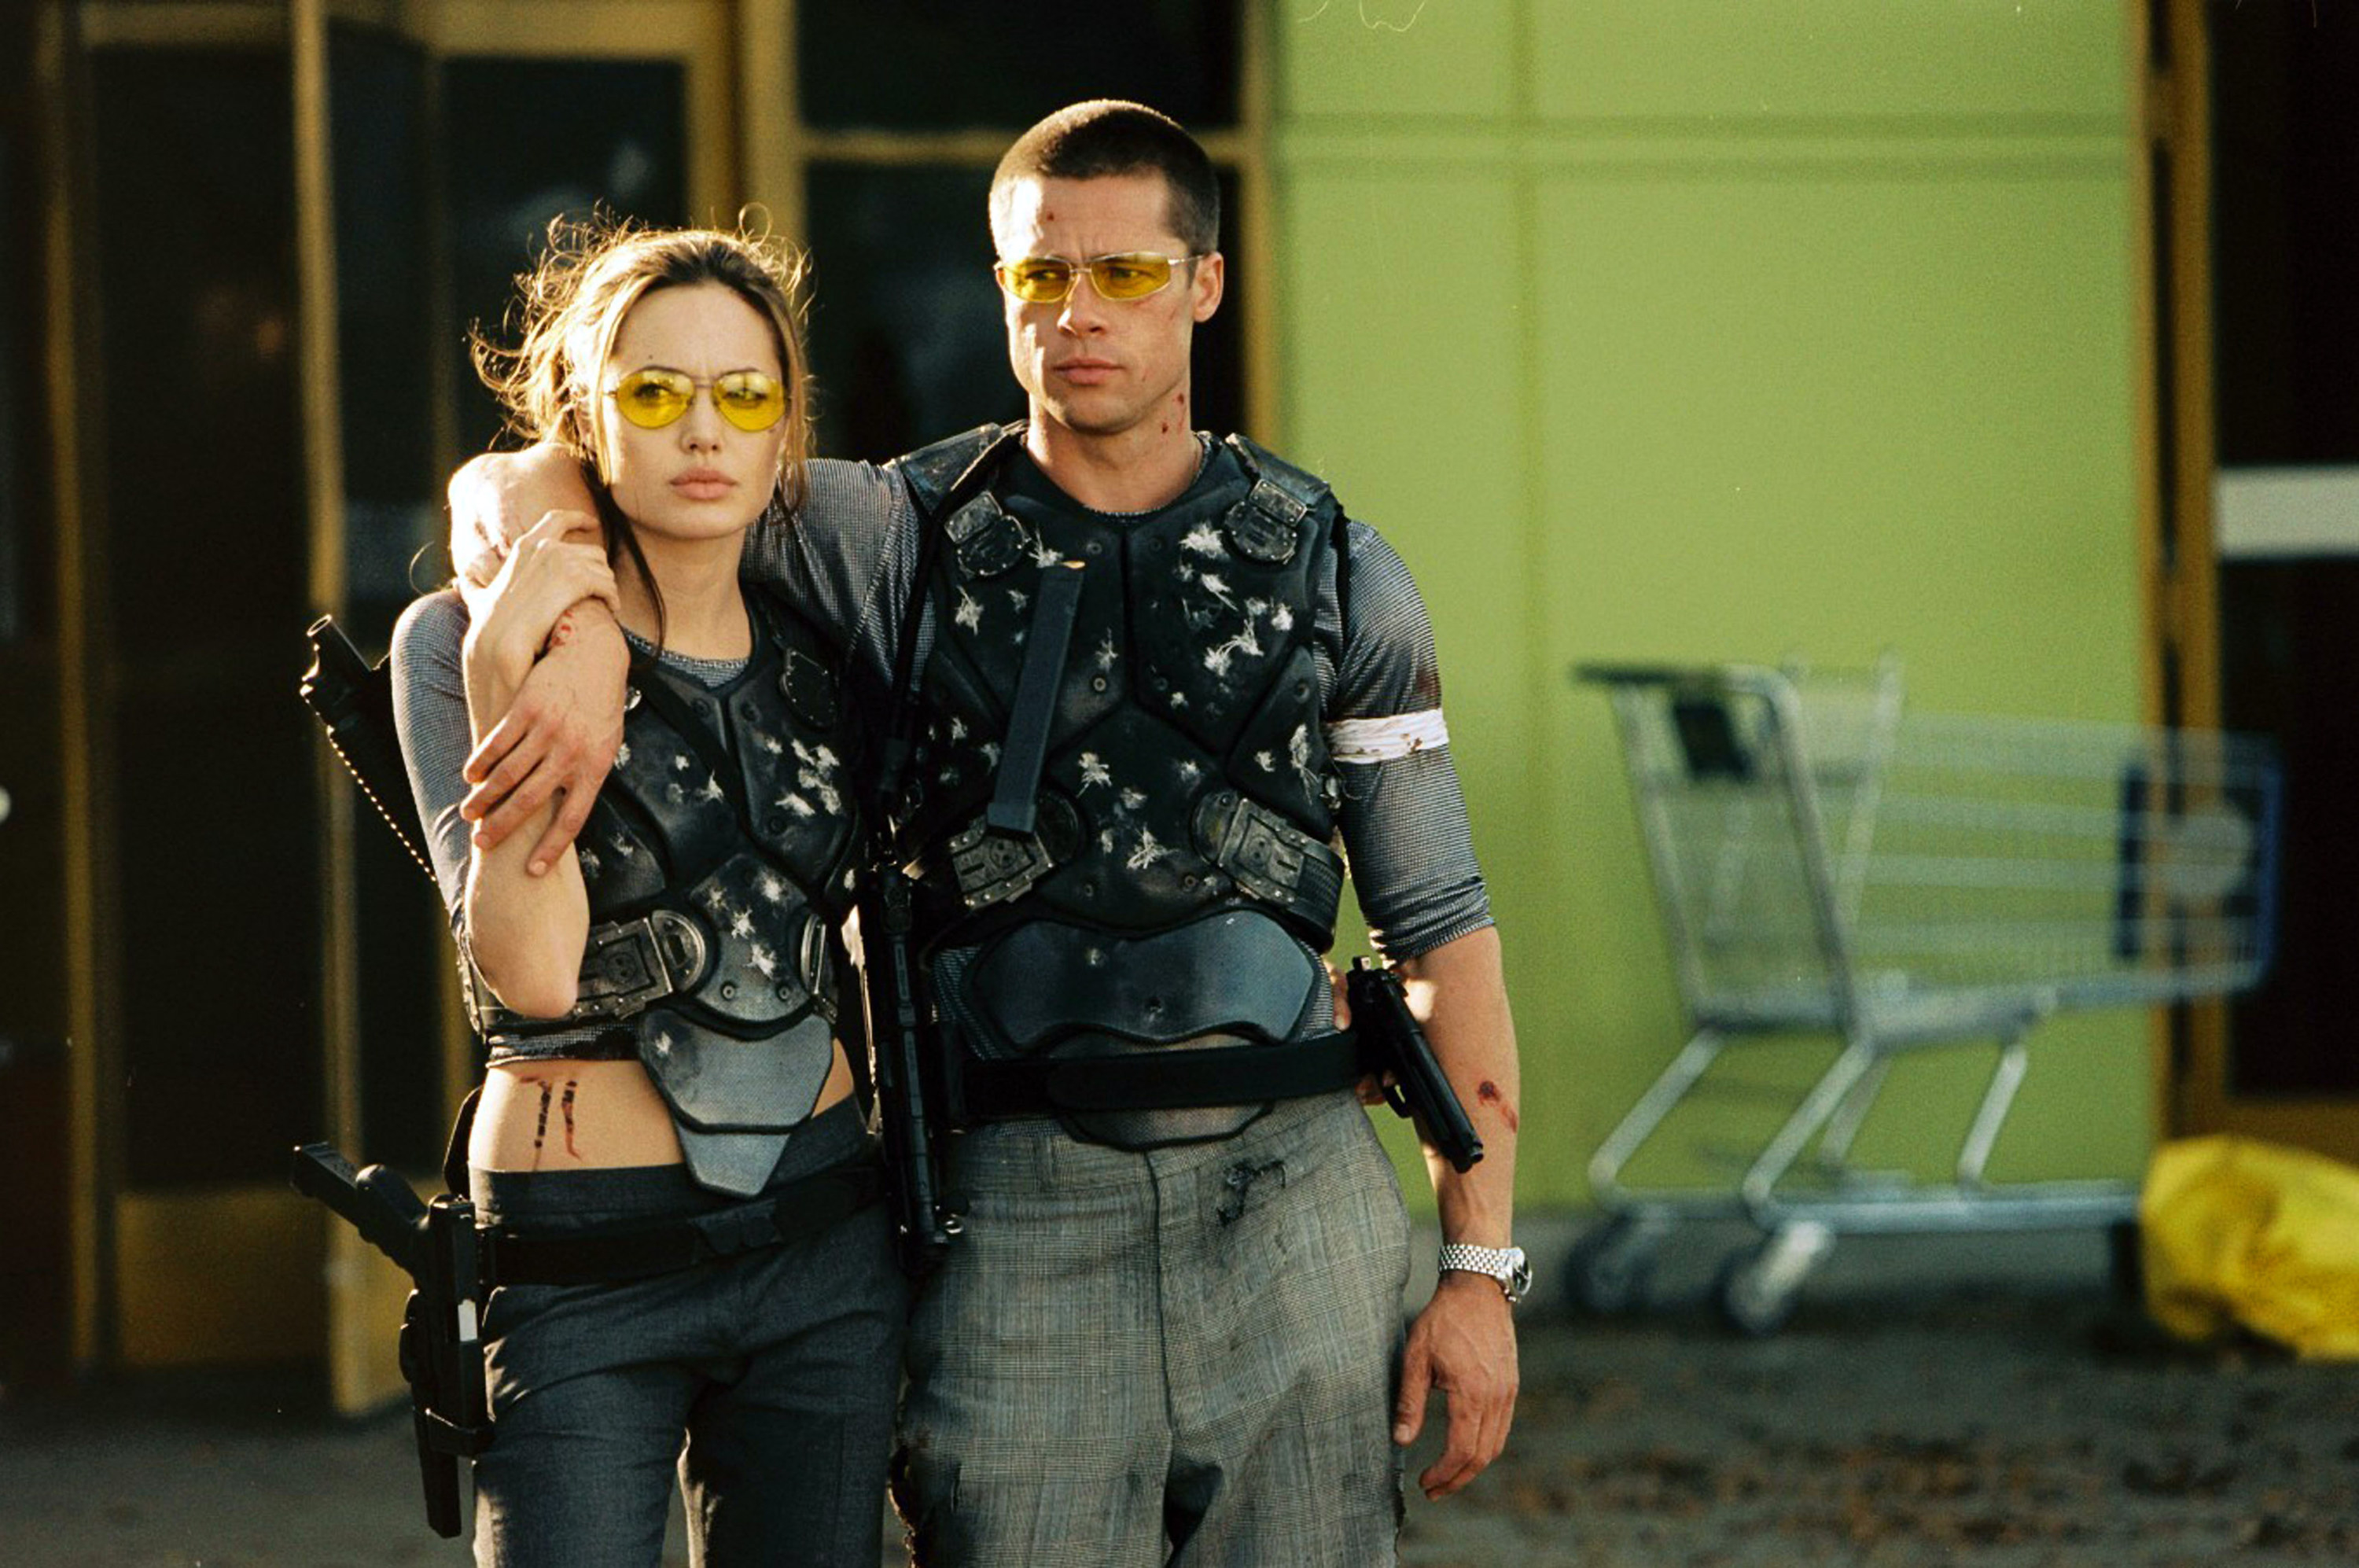 Brad Pitt and Angelina Jolie wear bullet-proof vests in a decrepit house